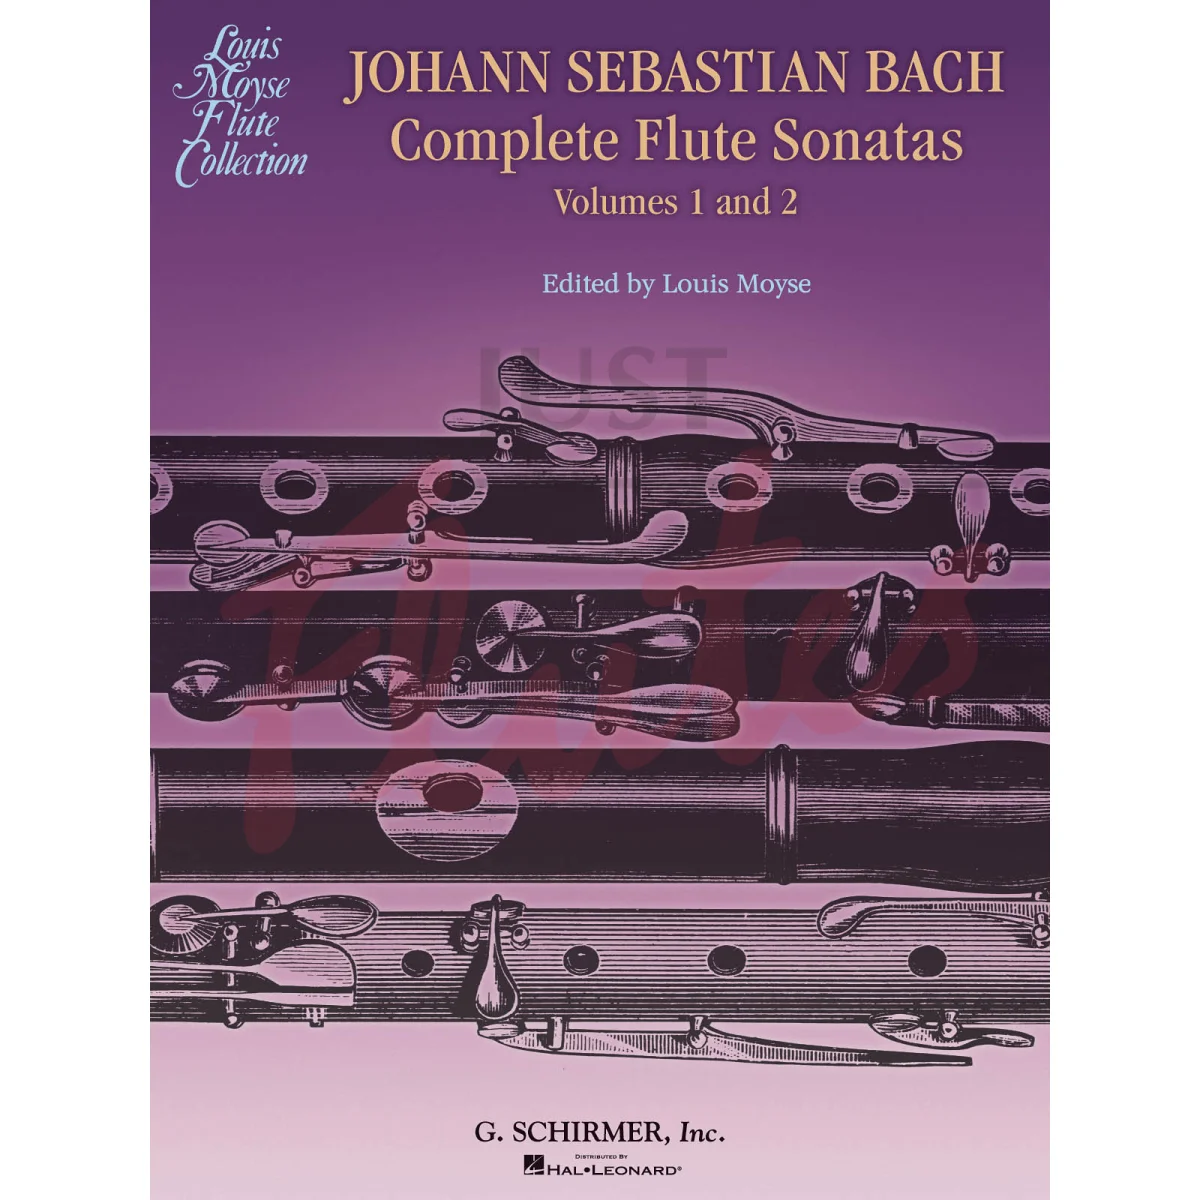 Complete Flute Sonatas - Volumes 1 and 2